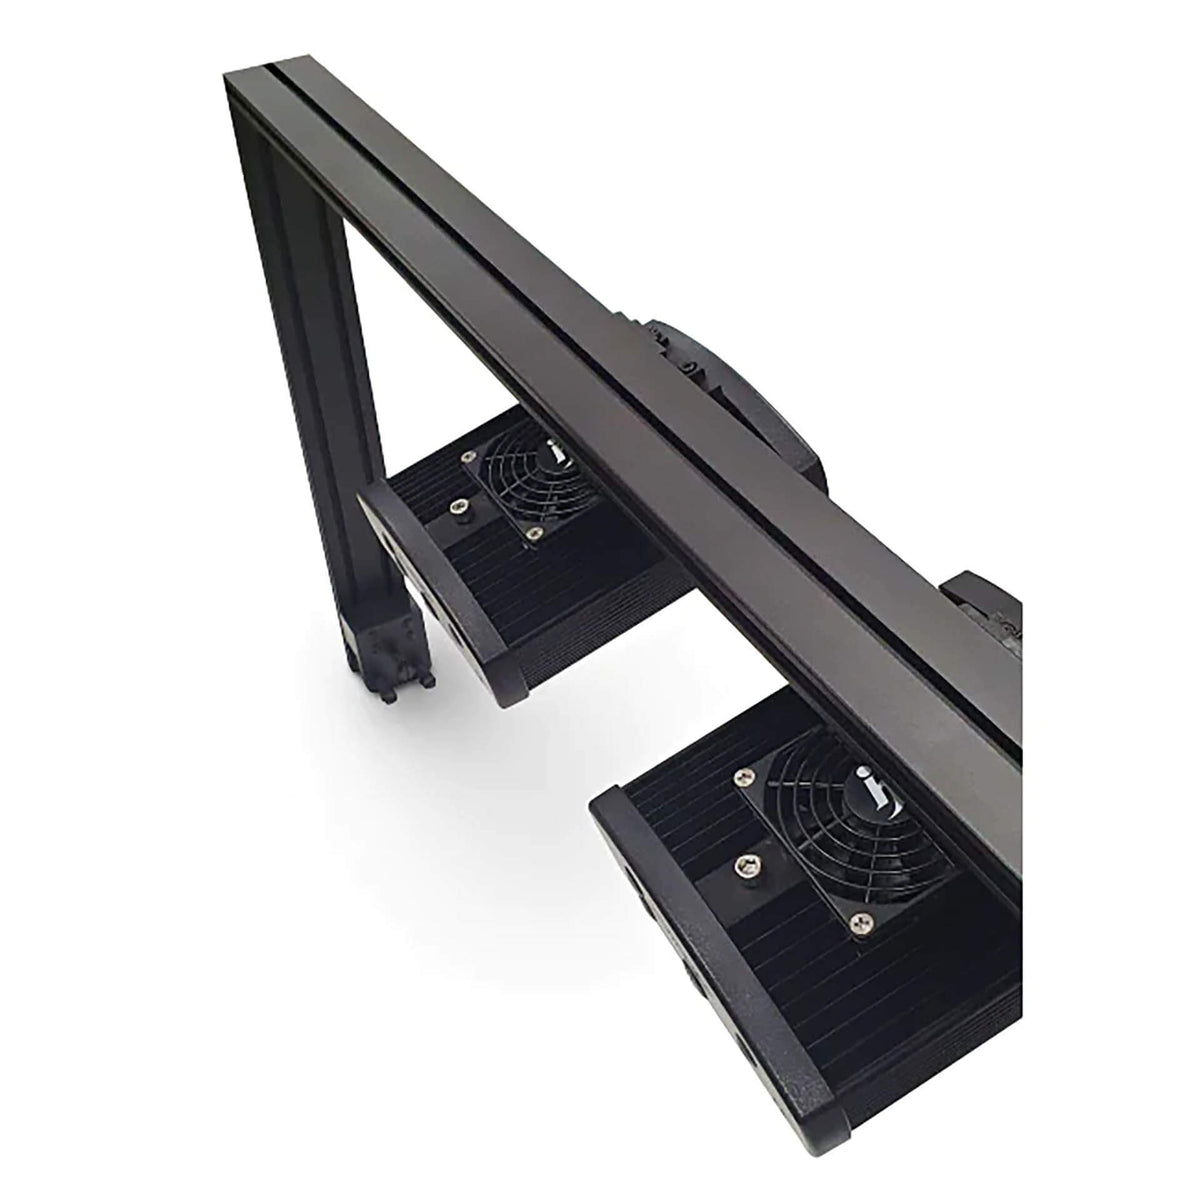 Illumagic 150cm Rail Only Mounting System** - Special Order Item